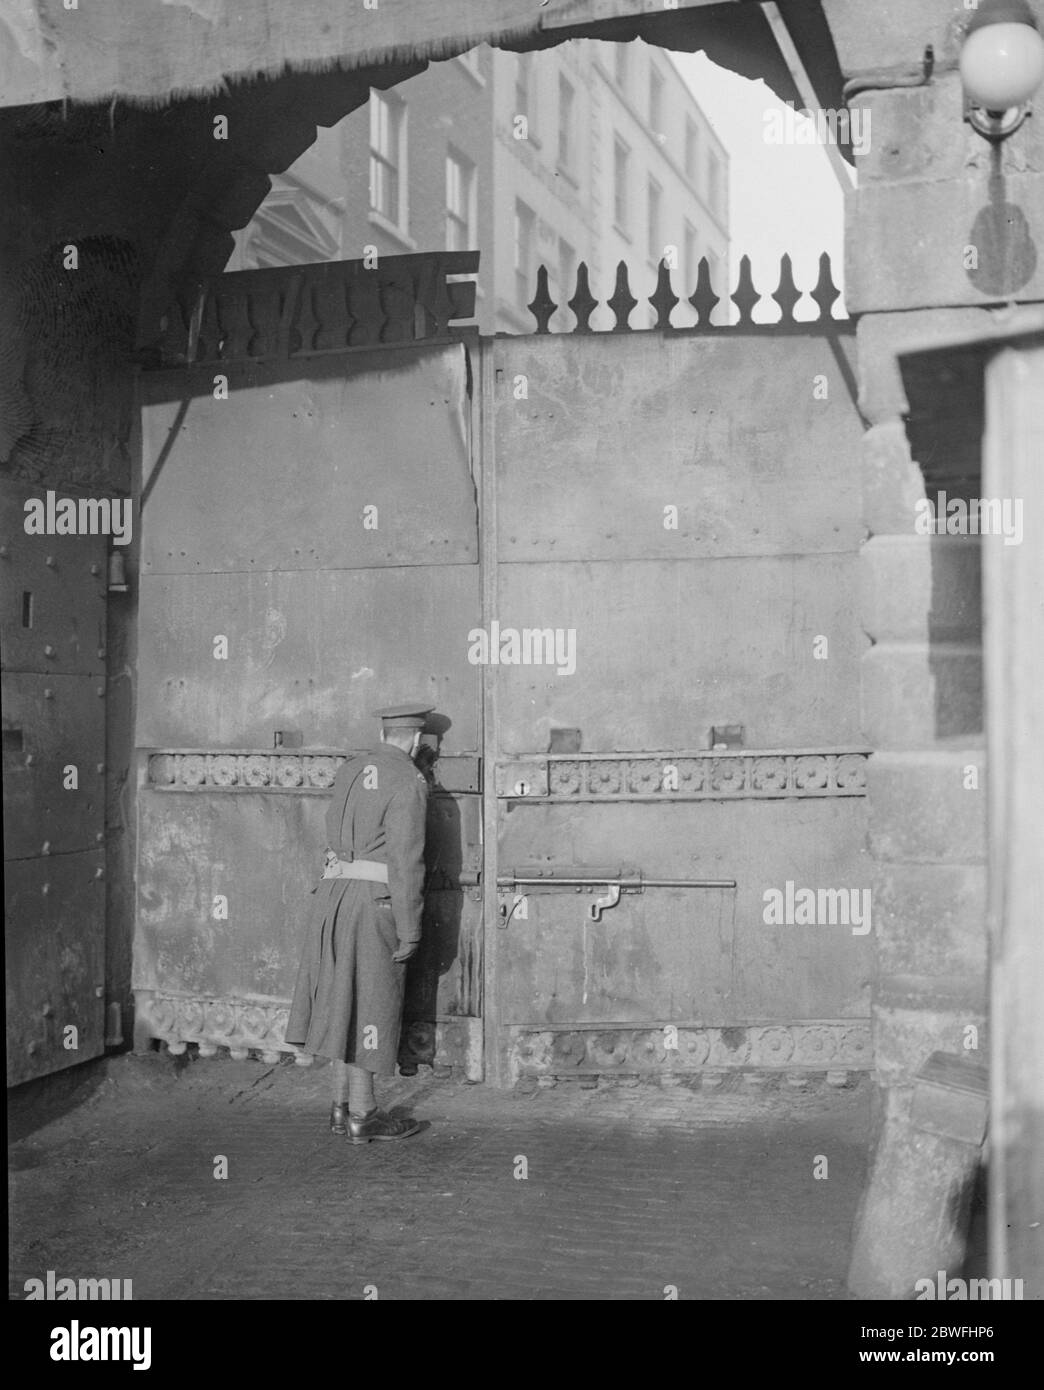 Historic Dublin Scenes . Provisional Government of Southern Ireland take over control of Dublin Castle . The main gate at the castle , armoured and loopholed , showing an English sentry on guard . He is watching for the arrival of the cars containing the members of the Irish Free State Provisional Government . 17 January 1922 17 January 1922 Stock Photo